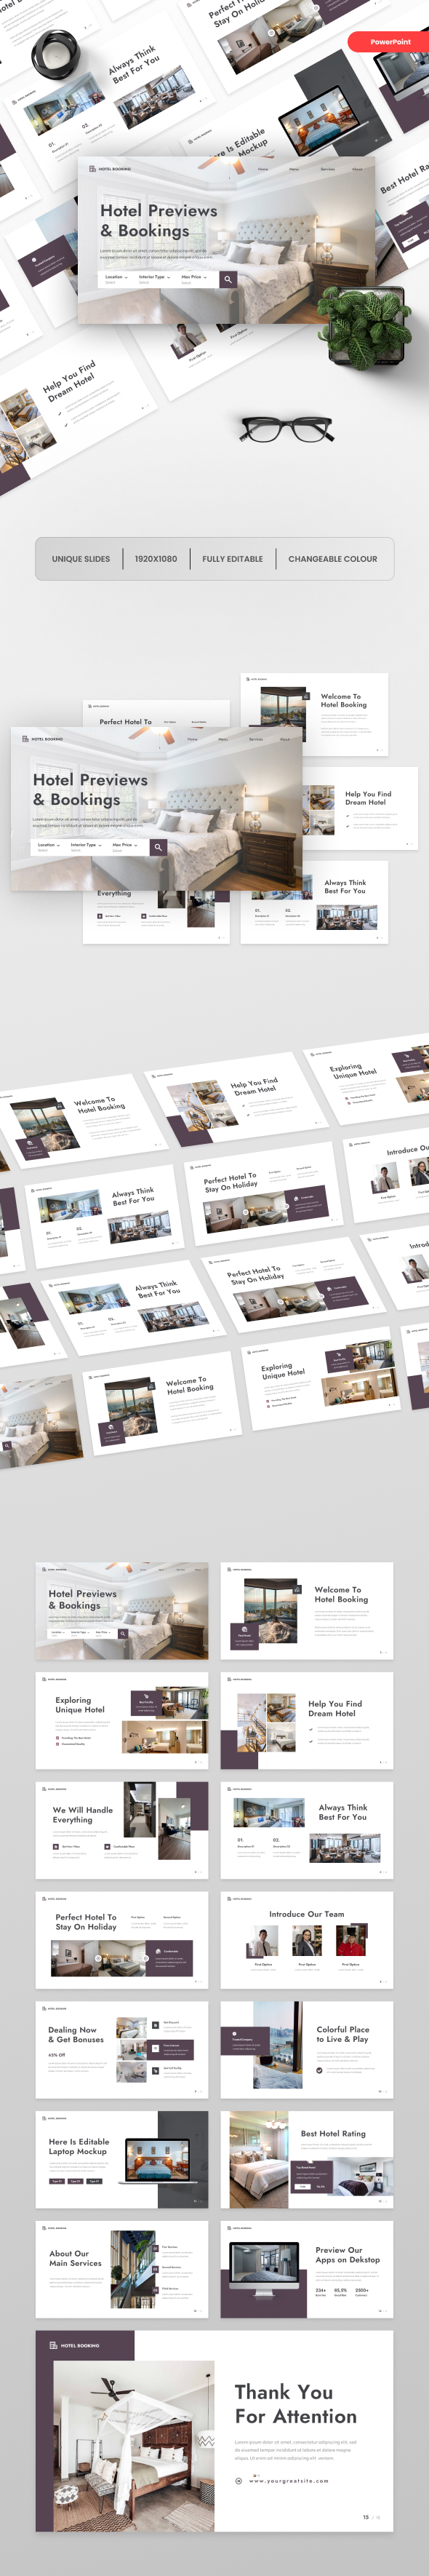 Hotel Booking PowerPoint Template